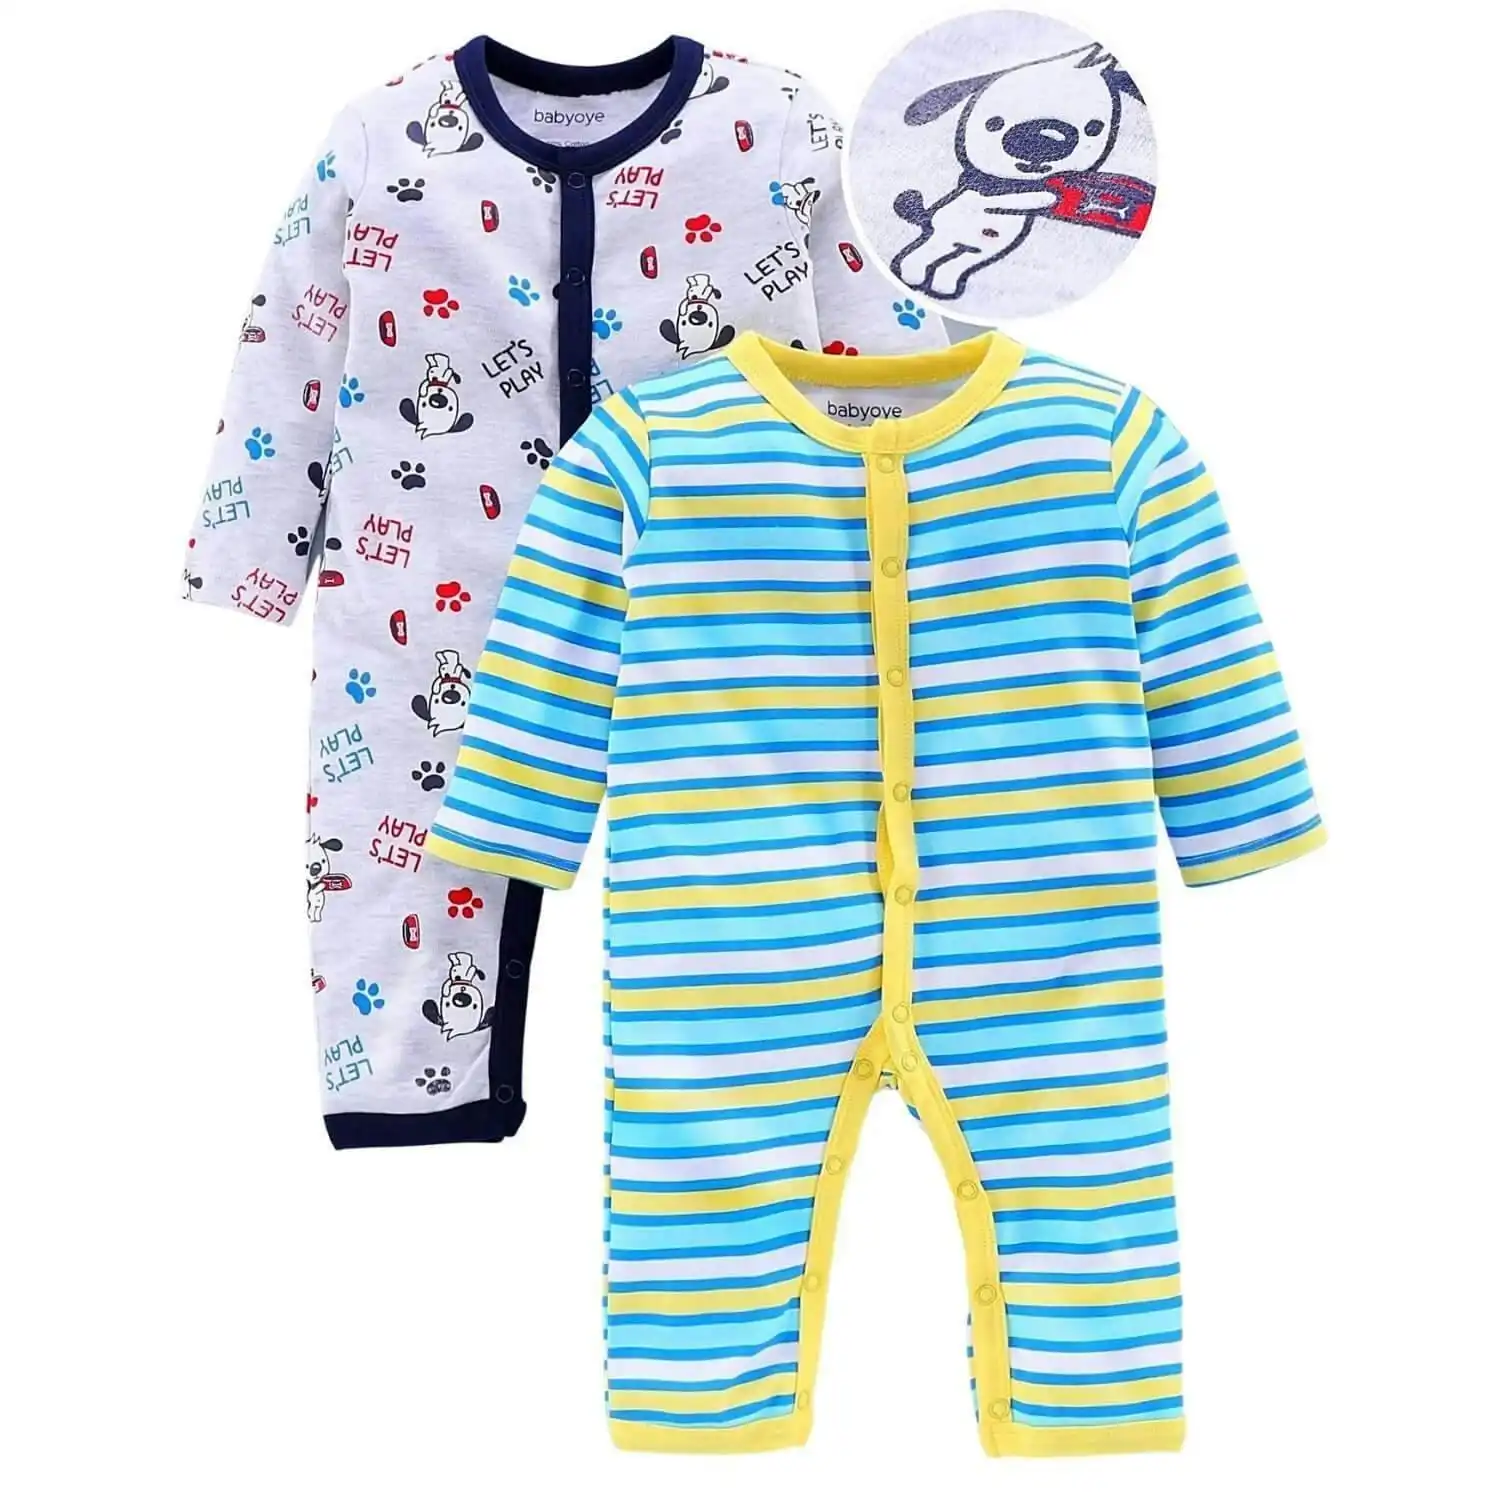 BabiesMart 2 Pack New Born Baby Clothes Unisex Full Sleeves Rompers